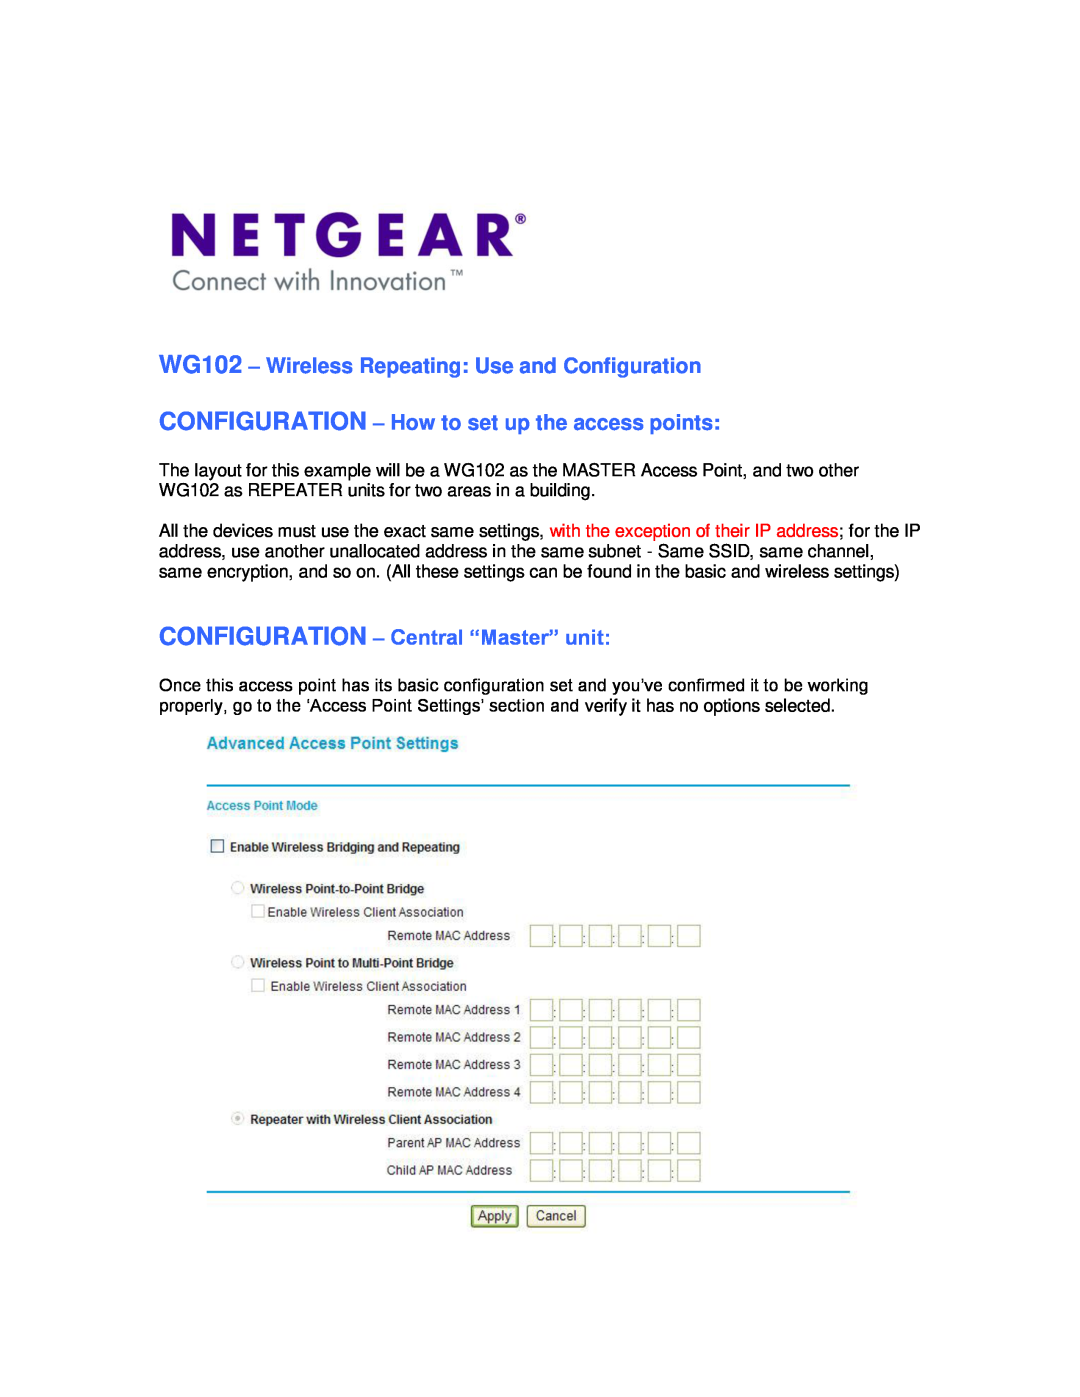 NETGEAR manual WG102 - Wireless Repeating Use and Configuration, CONFIGURATION - How to set up the access points 